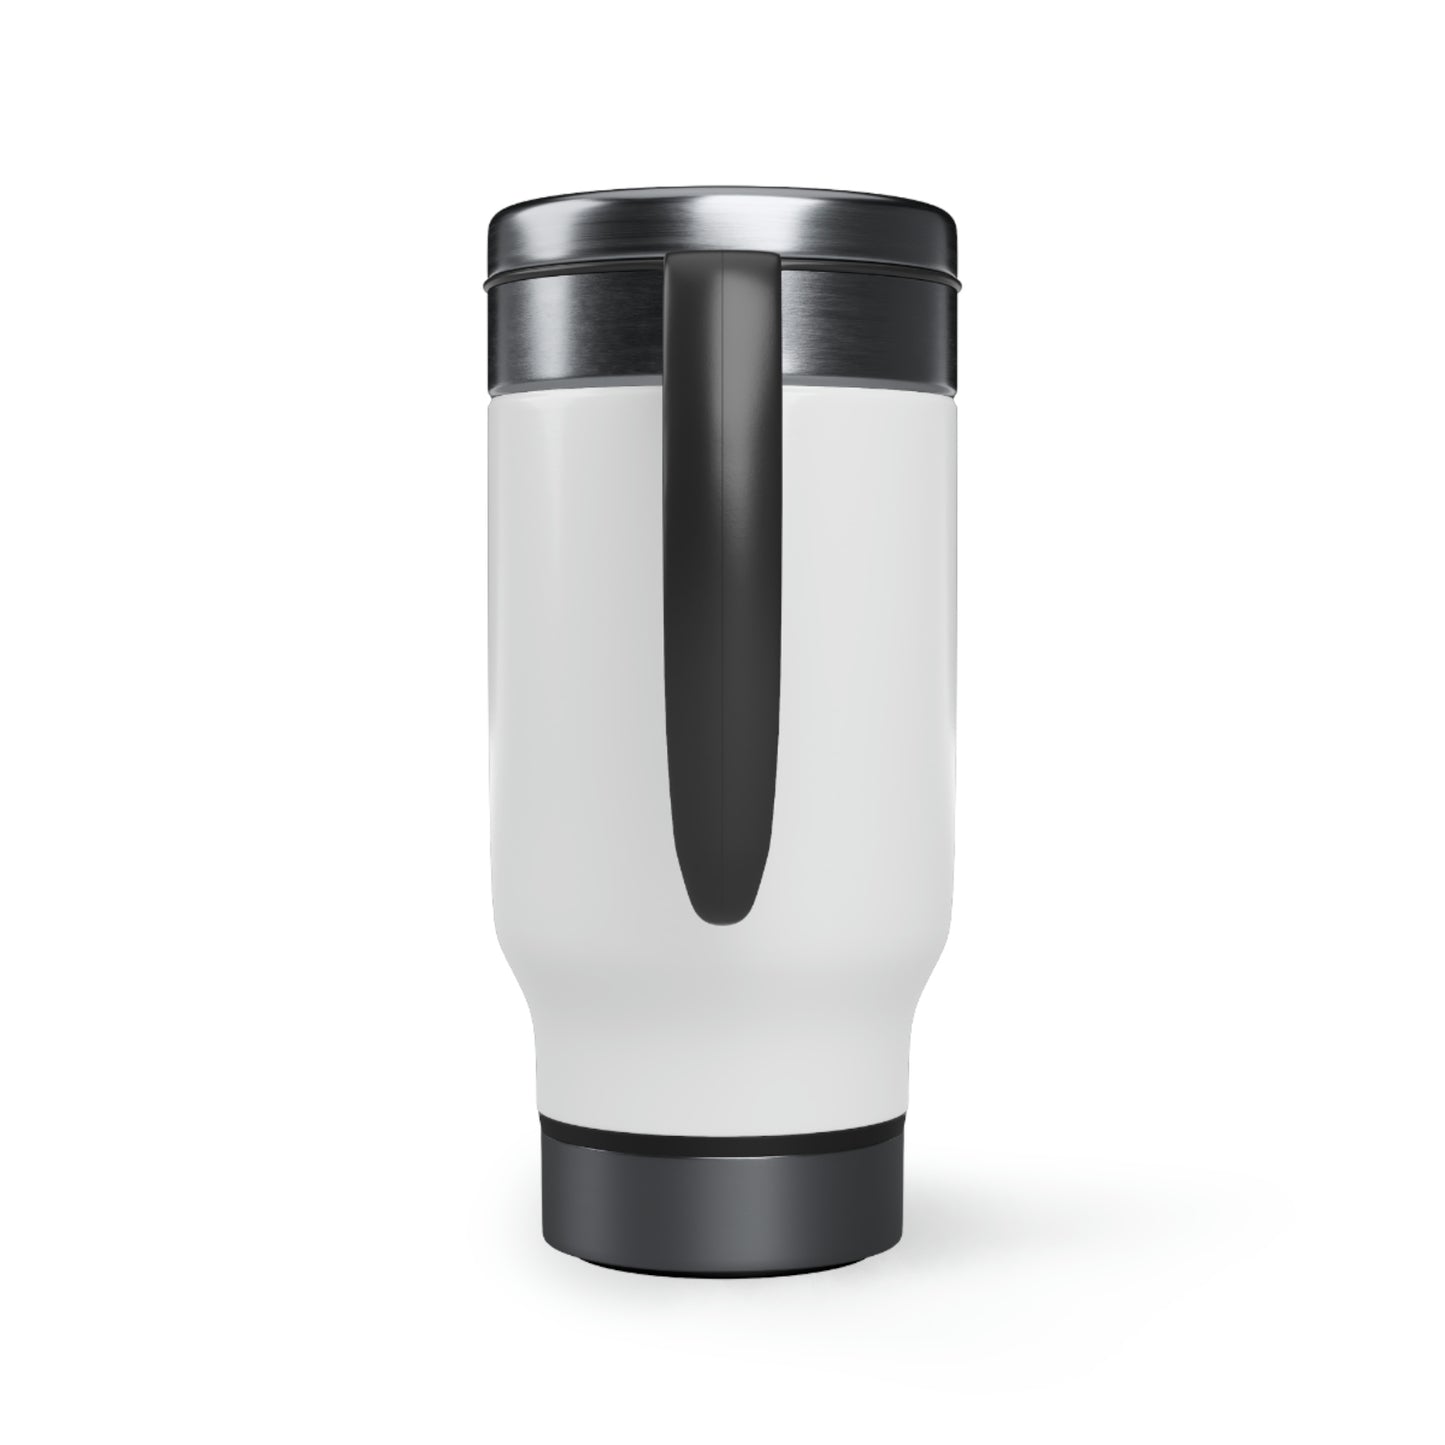 "Book Nerd" Stainless Steel Travel Mug with Handle, 14oz